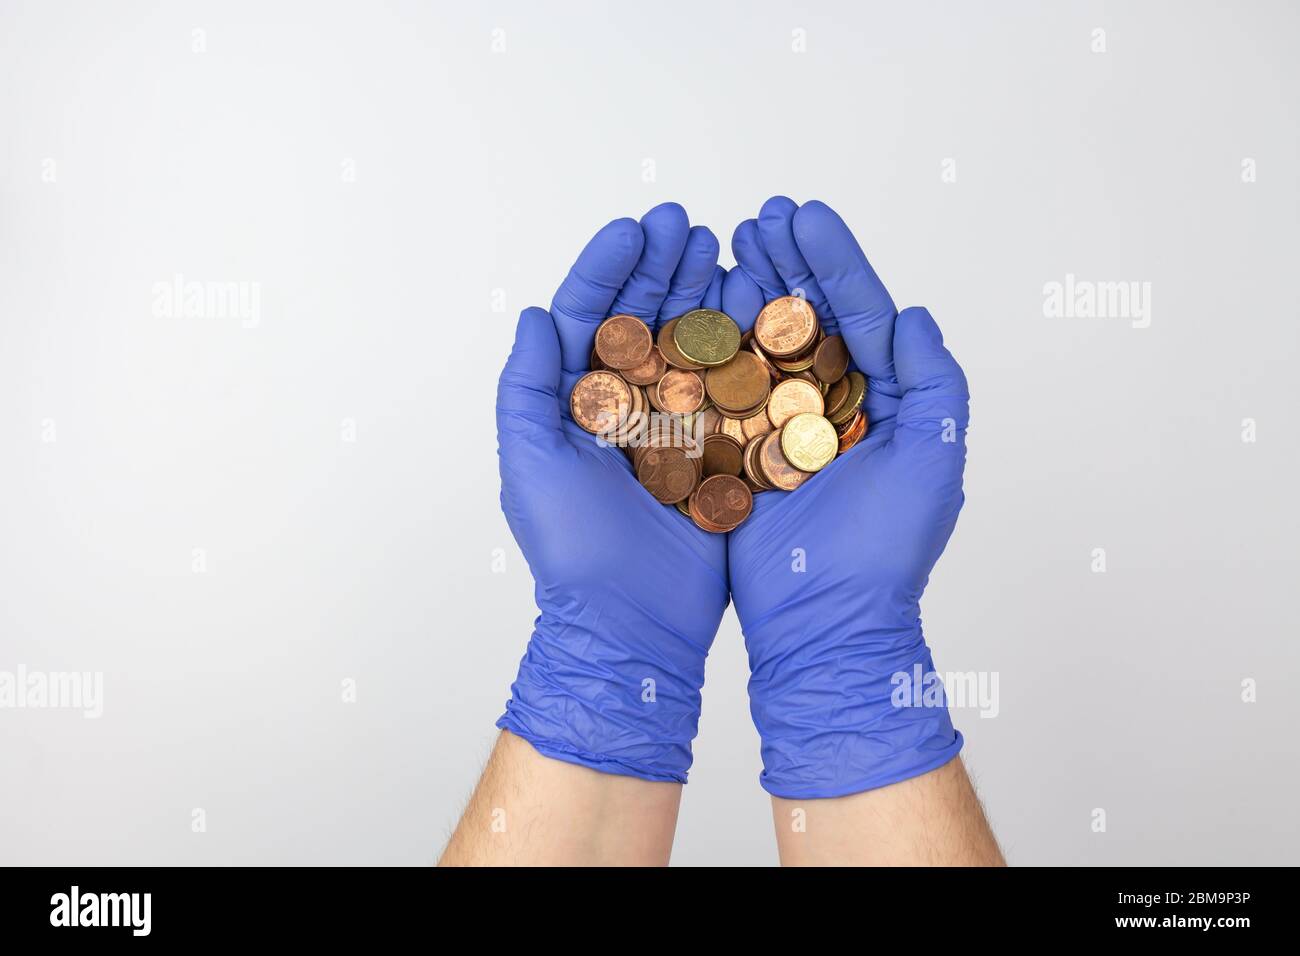 Hands with protection gloves holding Spanish Euro cent coins Stock Photo